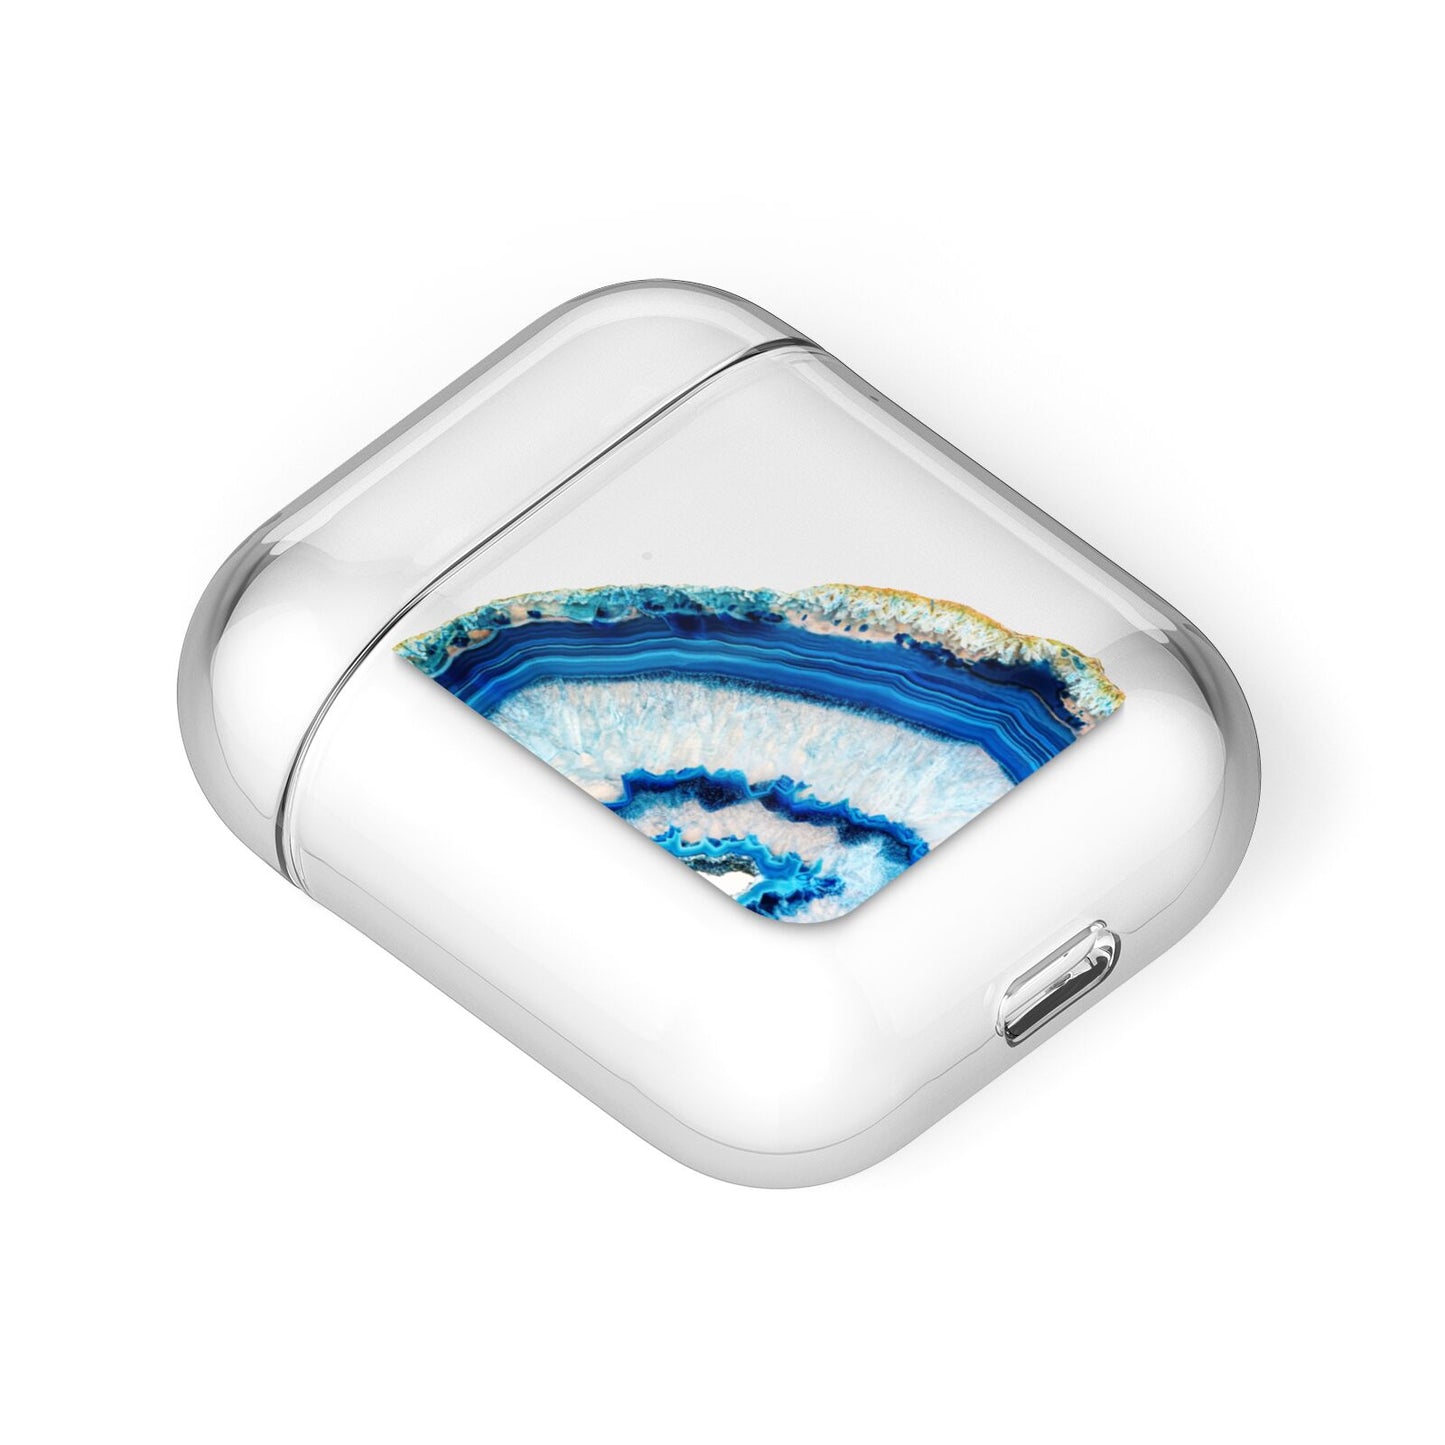 Agate Dark Blue and Turquoise AirPods Case Laid Flat